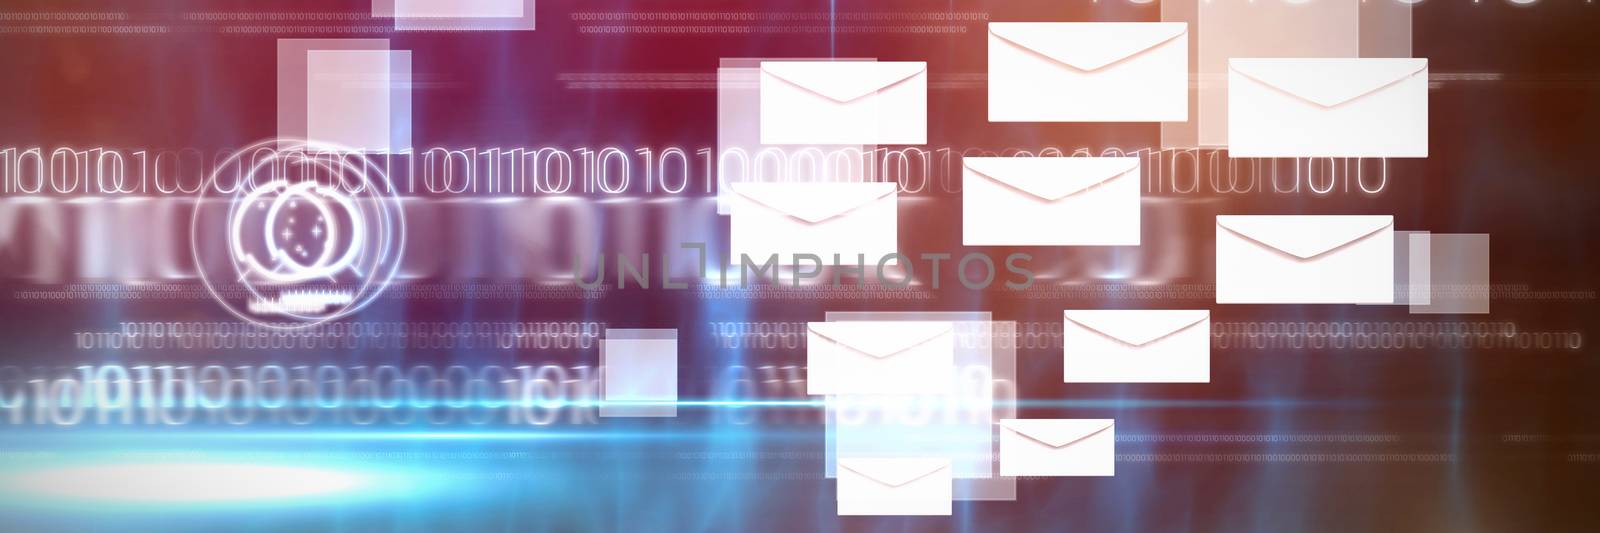 Graphic of Envelopes on white background against blue technology design with binary code